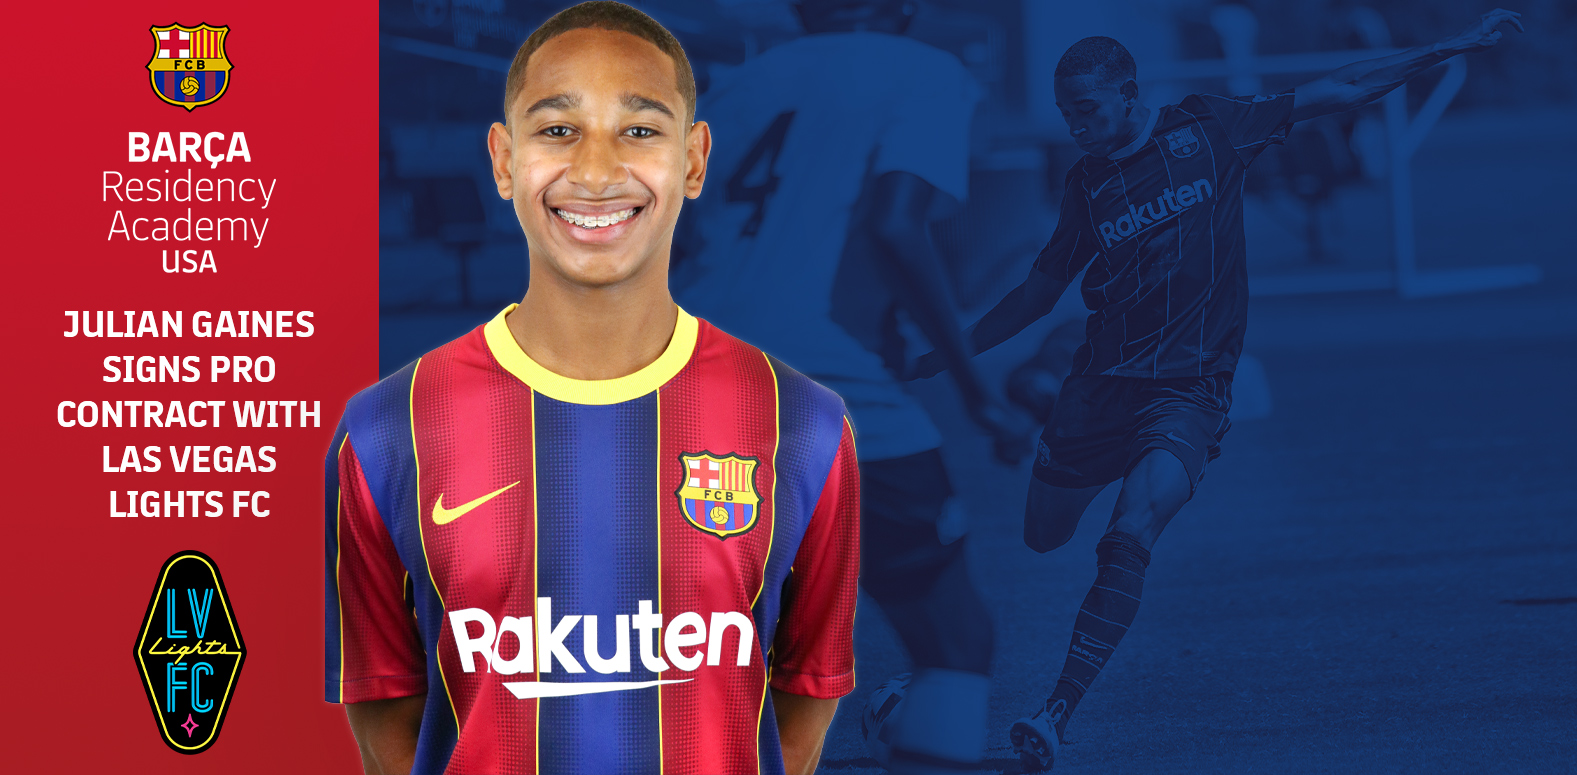 Barca Residency Academy's Julian Gains Signs with Las Vegas Lights FC